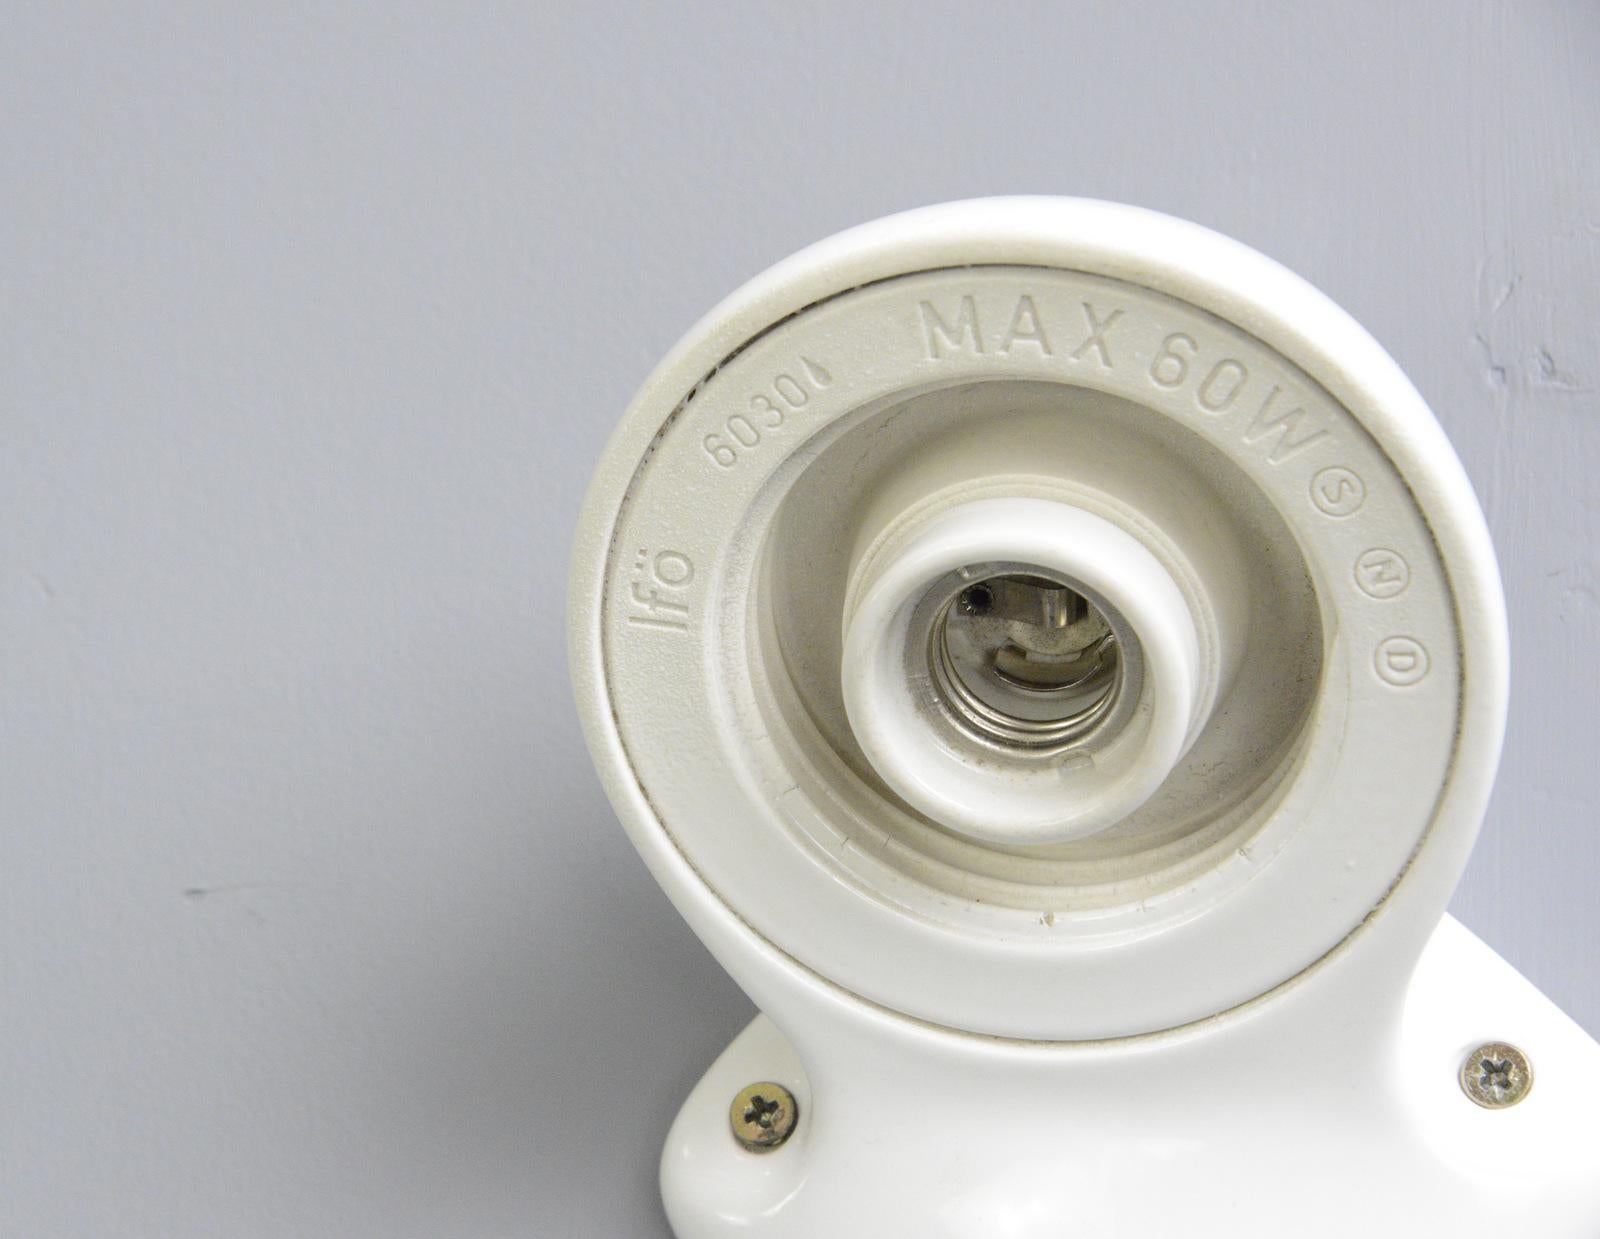 Porcelain bathroom lights by Sigvard Bernadotte for Ifo, circa 1950s

- Price is for the pair
- Vitreous white porcelain wall mounts
- Screw off opaline shades
- Takes E27 fitting bulbs
- Wires directly into the wall
- Designed by Sigvard